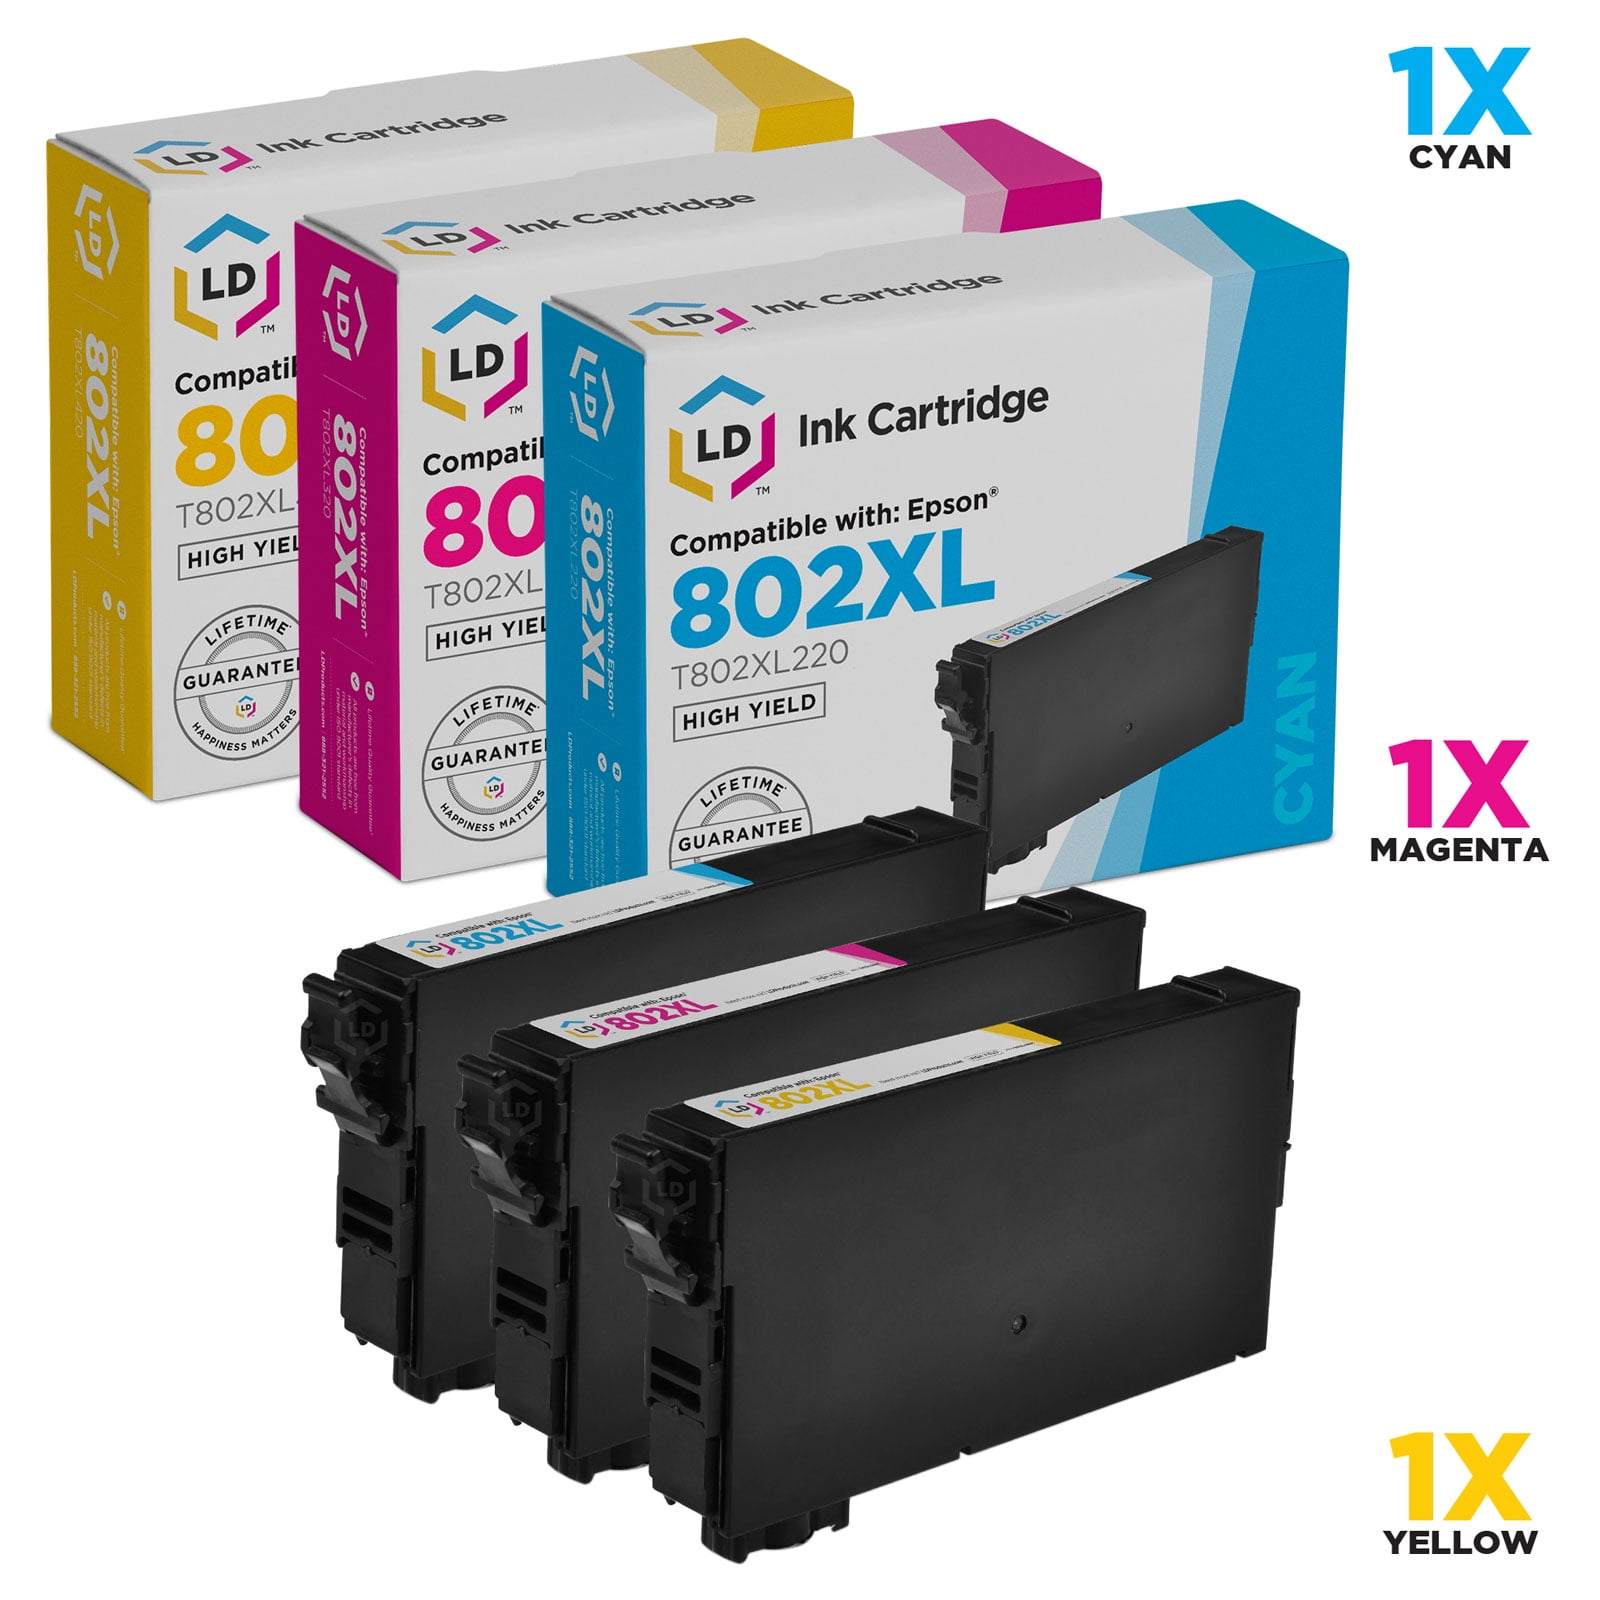 Clorisun 35XL Ink Cartridges for Epson 35XL 35 XL Ink Black Cyan Magenta  Yellow for Epson WorkForce Pro WF-4720DWF WF-4725DWF WF-4730DTWF  WF-4740DTWF WF-4730 WF-4720 WF-4725 WF-4740 Printer(4 Pack): :  Computers & Accessories